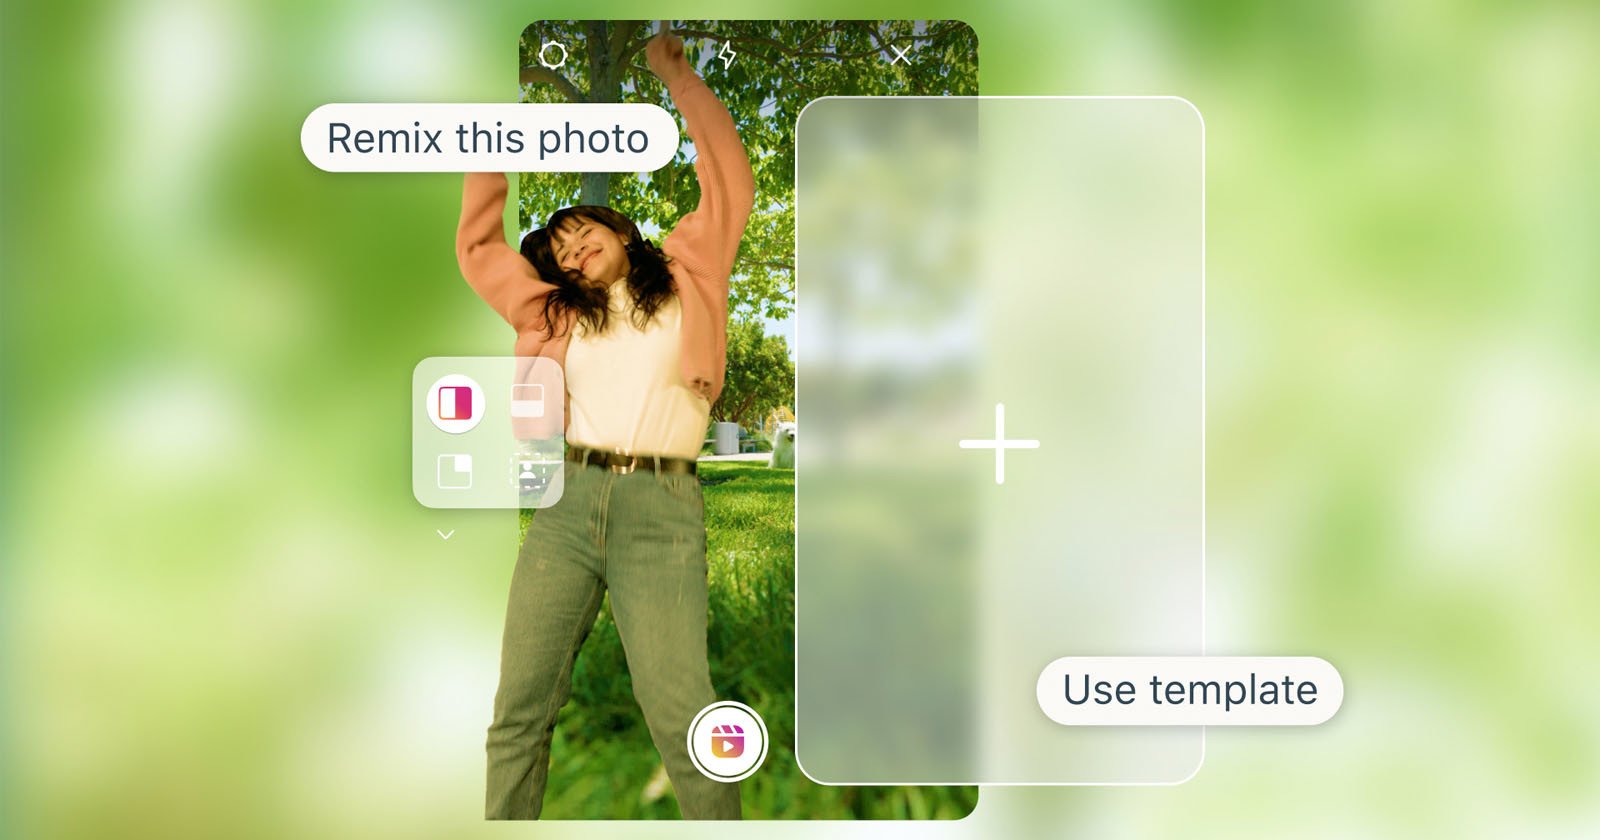 Anyone Can Now Make Any Public Instagram Photo into a Reel